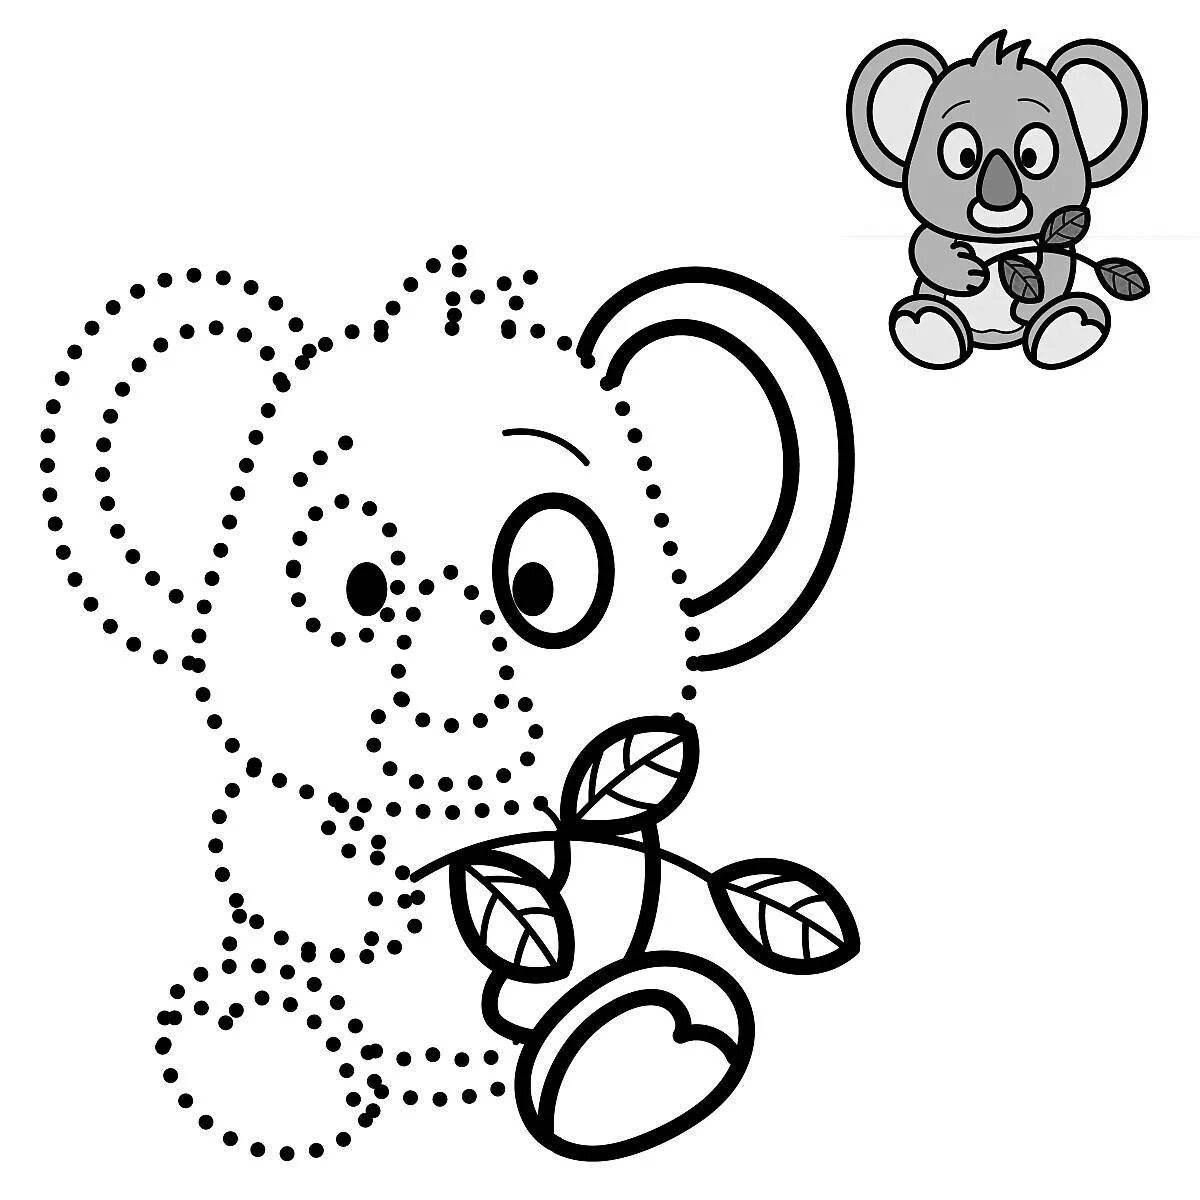 Colored explosive coloring pages for children 5-6 years old